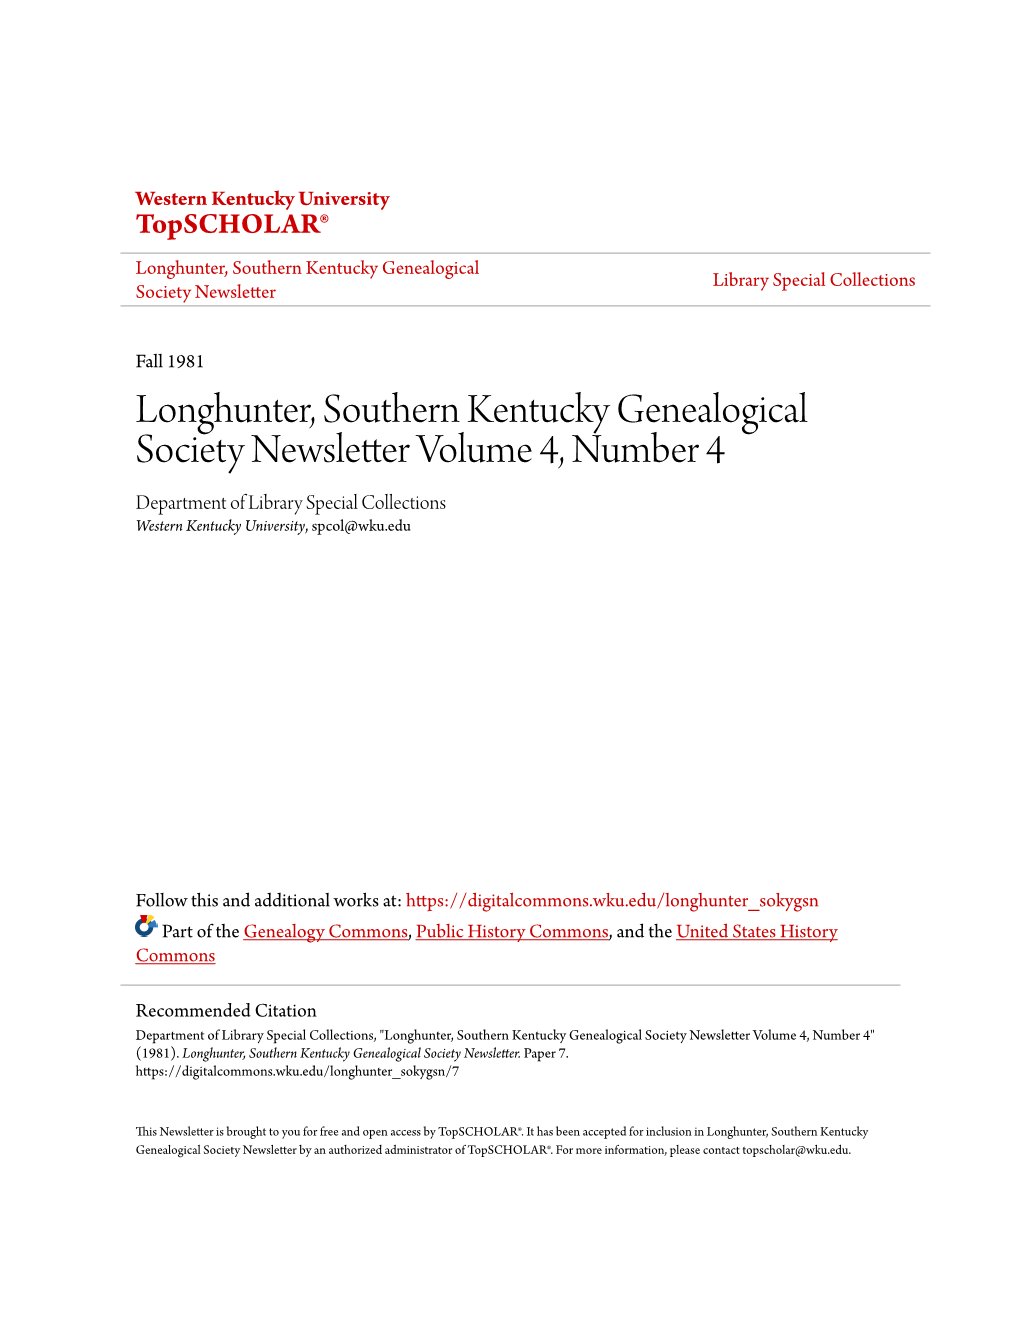 Longhunter, Southern Kentucky Genealogical Society Newsletter Volume 4, Number 4 Department of Library Special Collections Western Kentucky University, Spcol@Wku.Edu